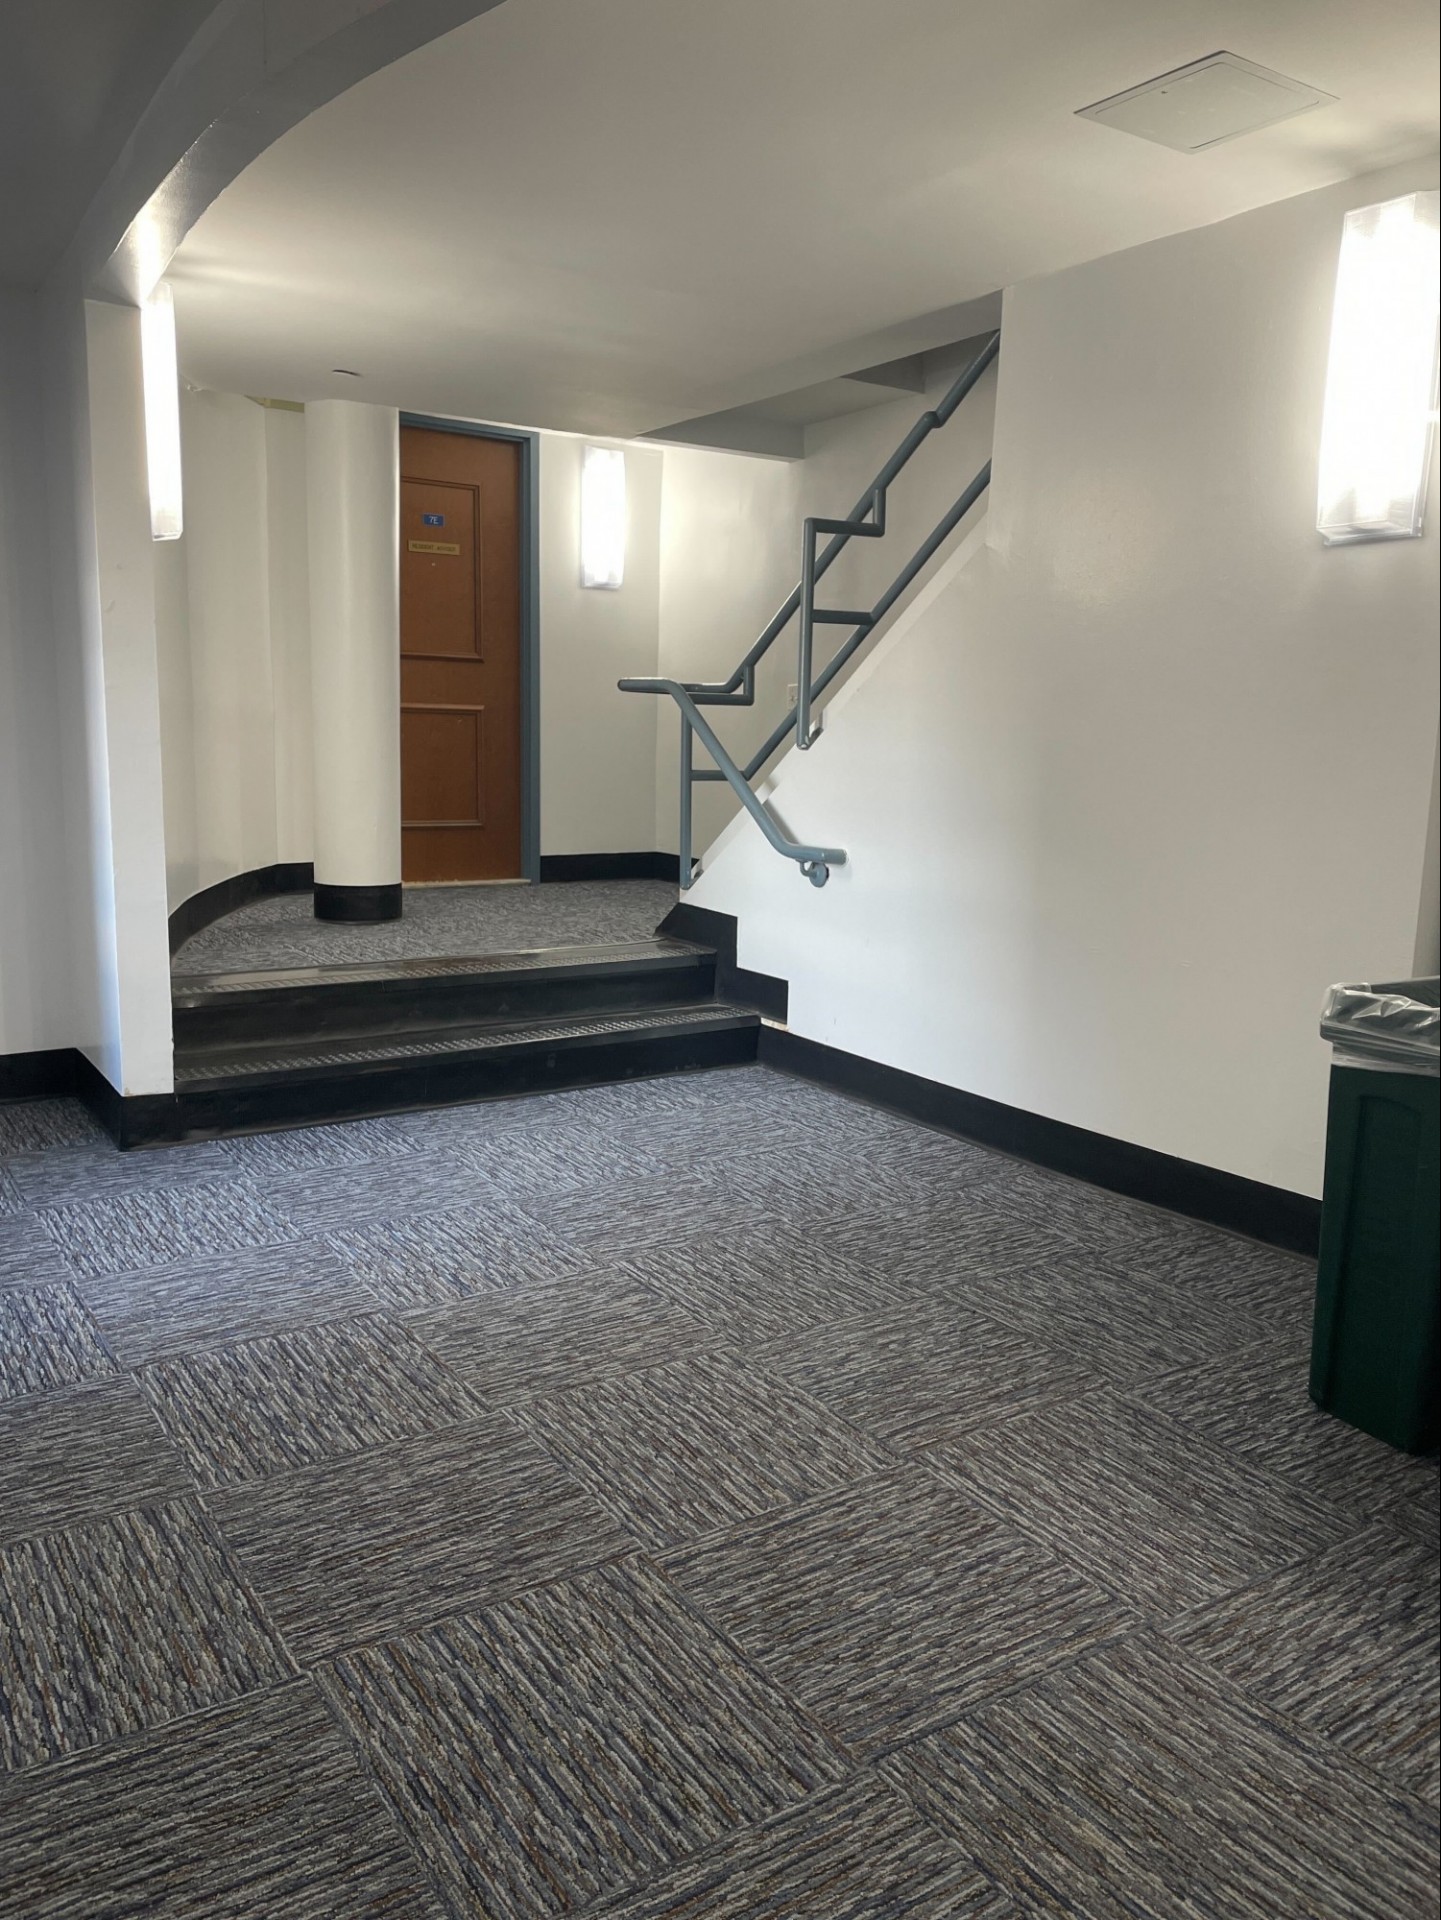 The updated Hogan entryway